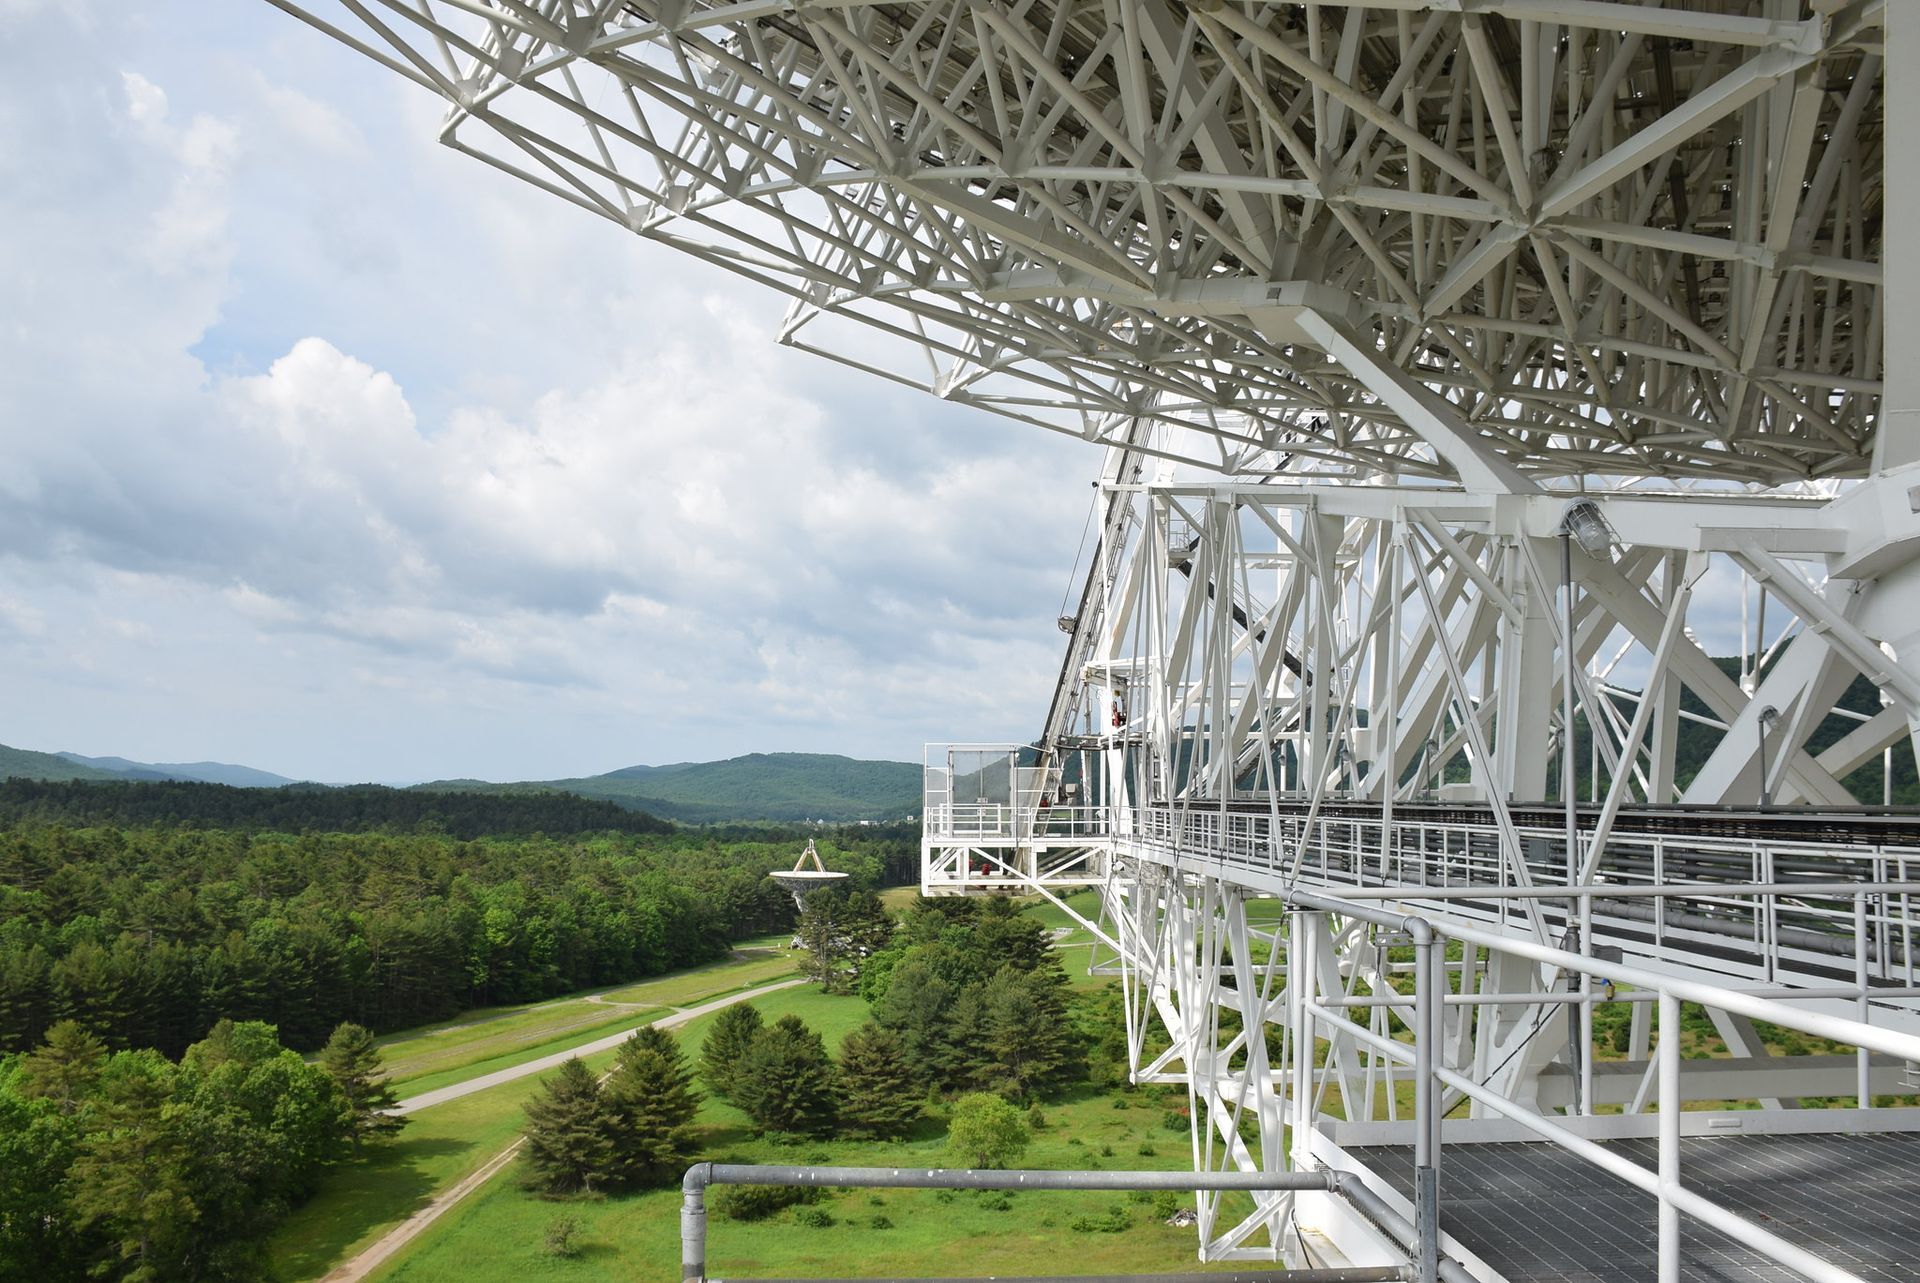 World’s Largest Fully Steerable Radio Telescope, world record in Green Bank, West Virginia